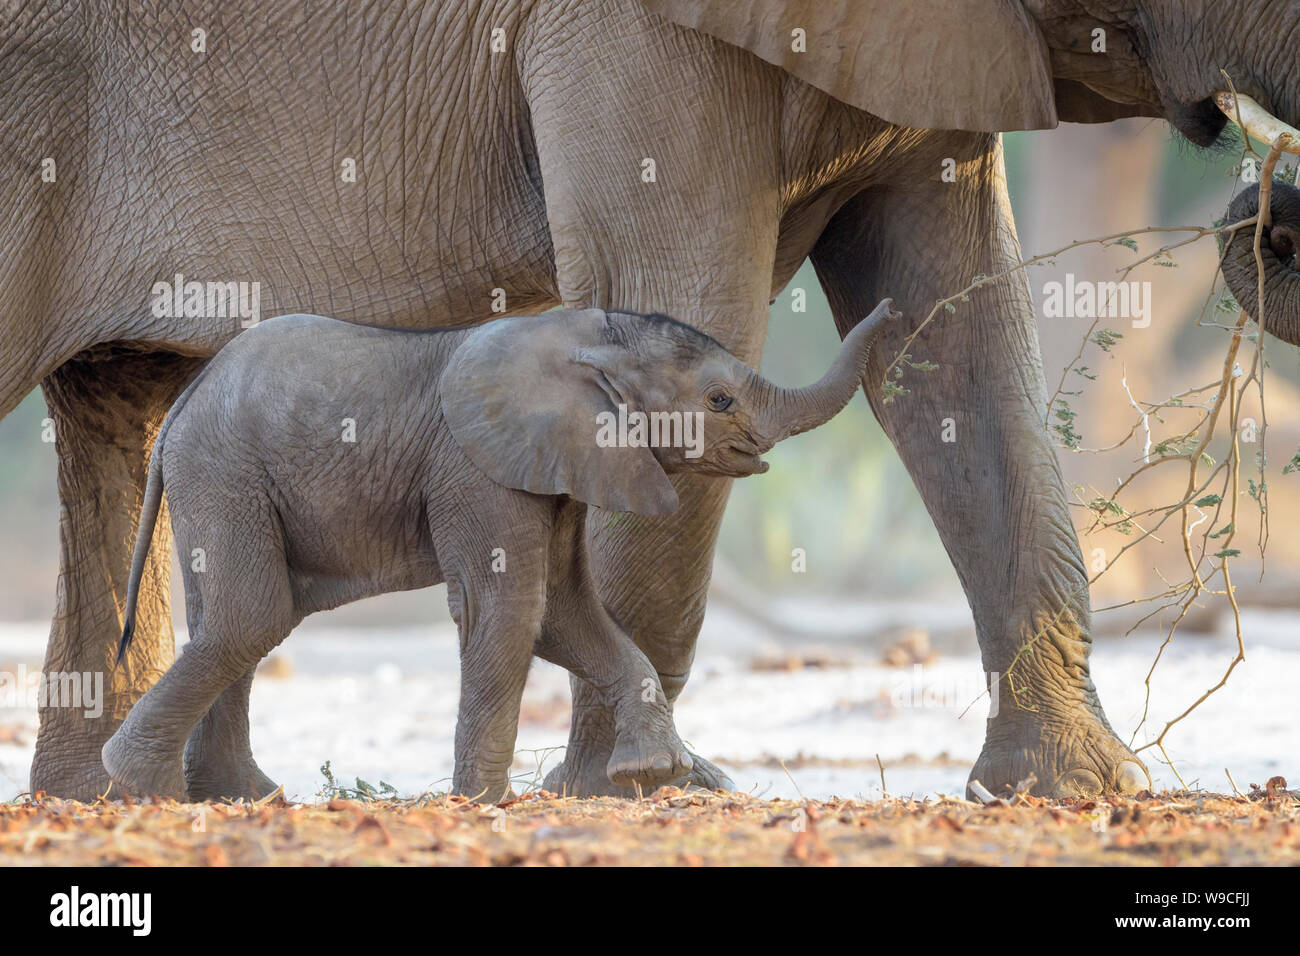 African Elephant (Loxodonta africana), desert-adapted elephant calf, playing with mother in dry riverbed, Hoanib desert, Kaokoland, Namibia. Stock Photo